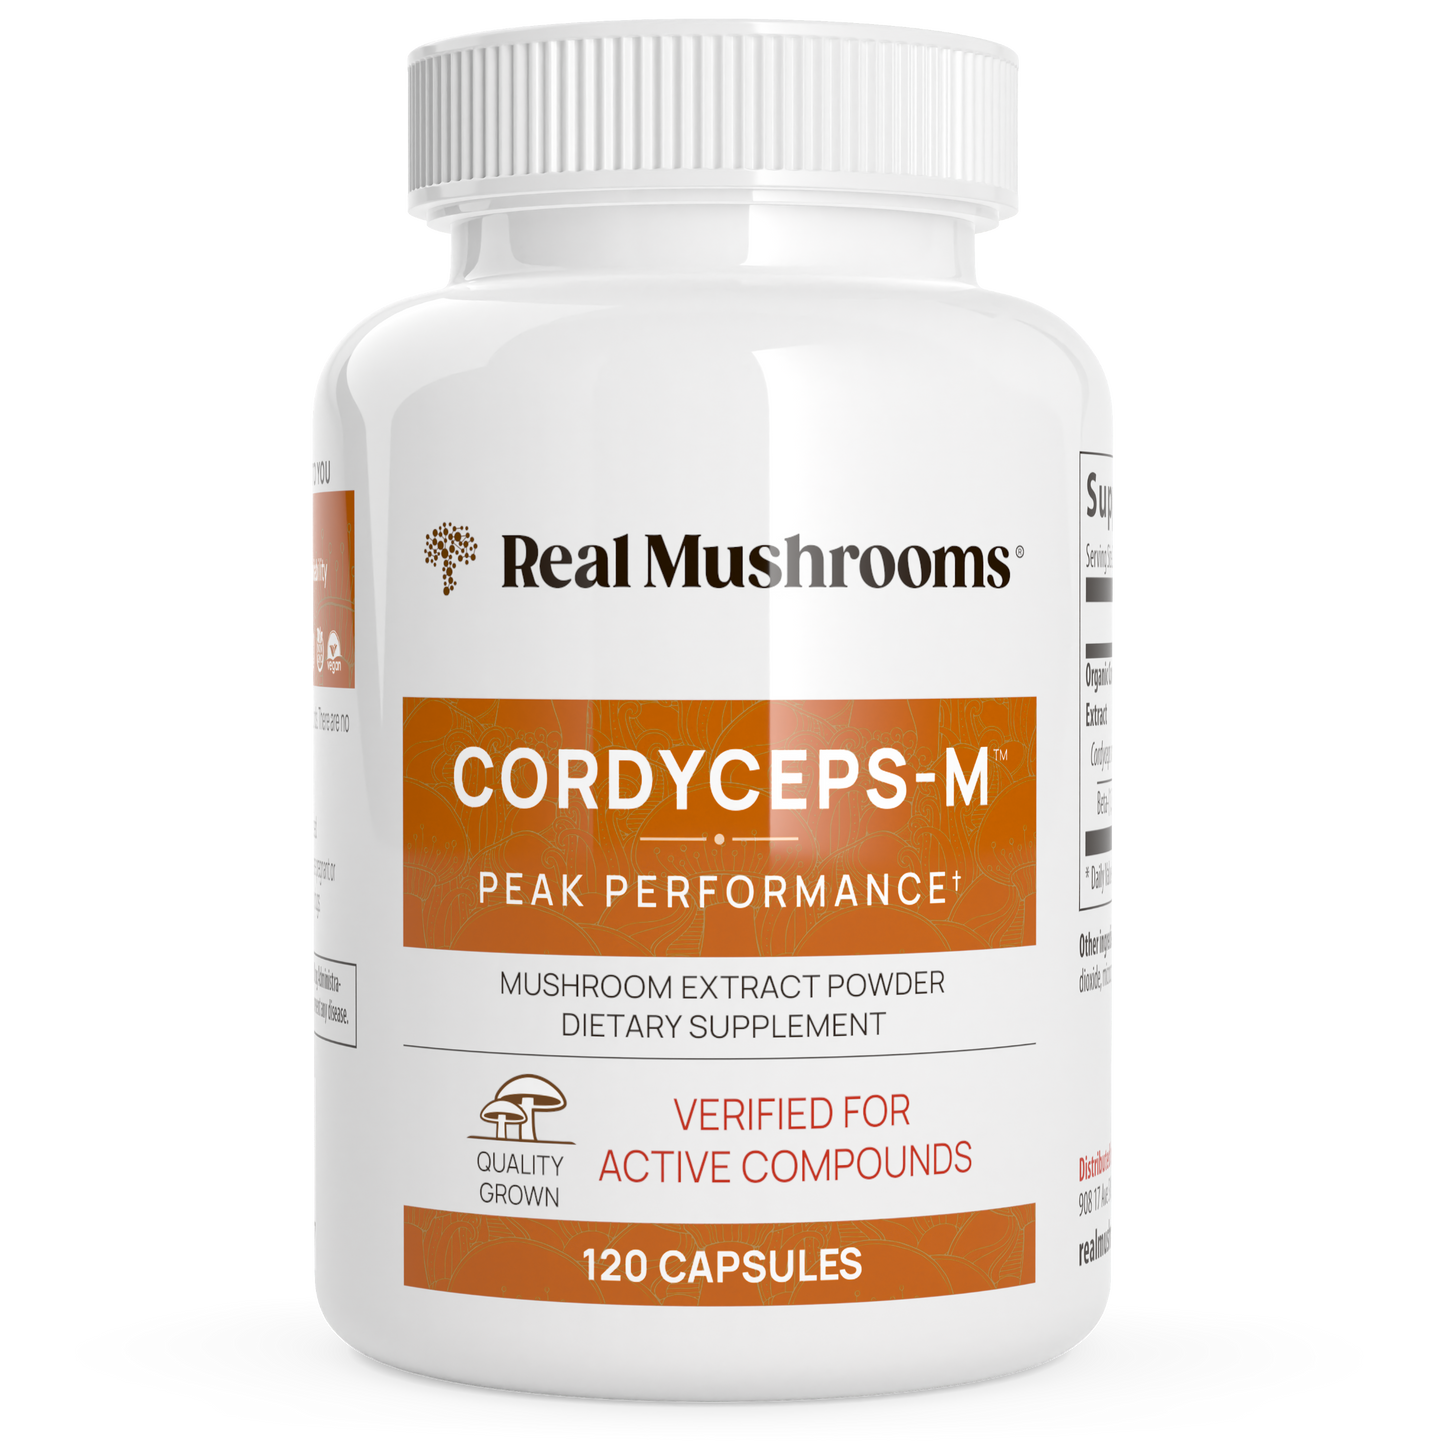 Organic Cordyceps Extract Capsules by Real Mushrooms